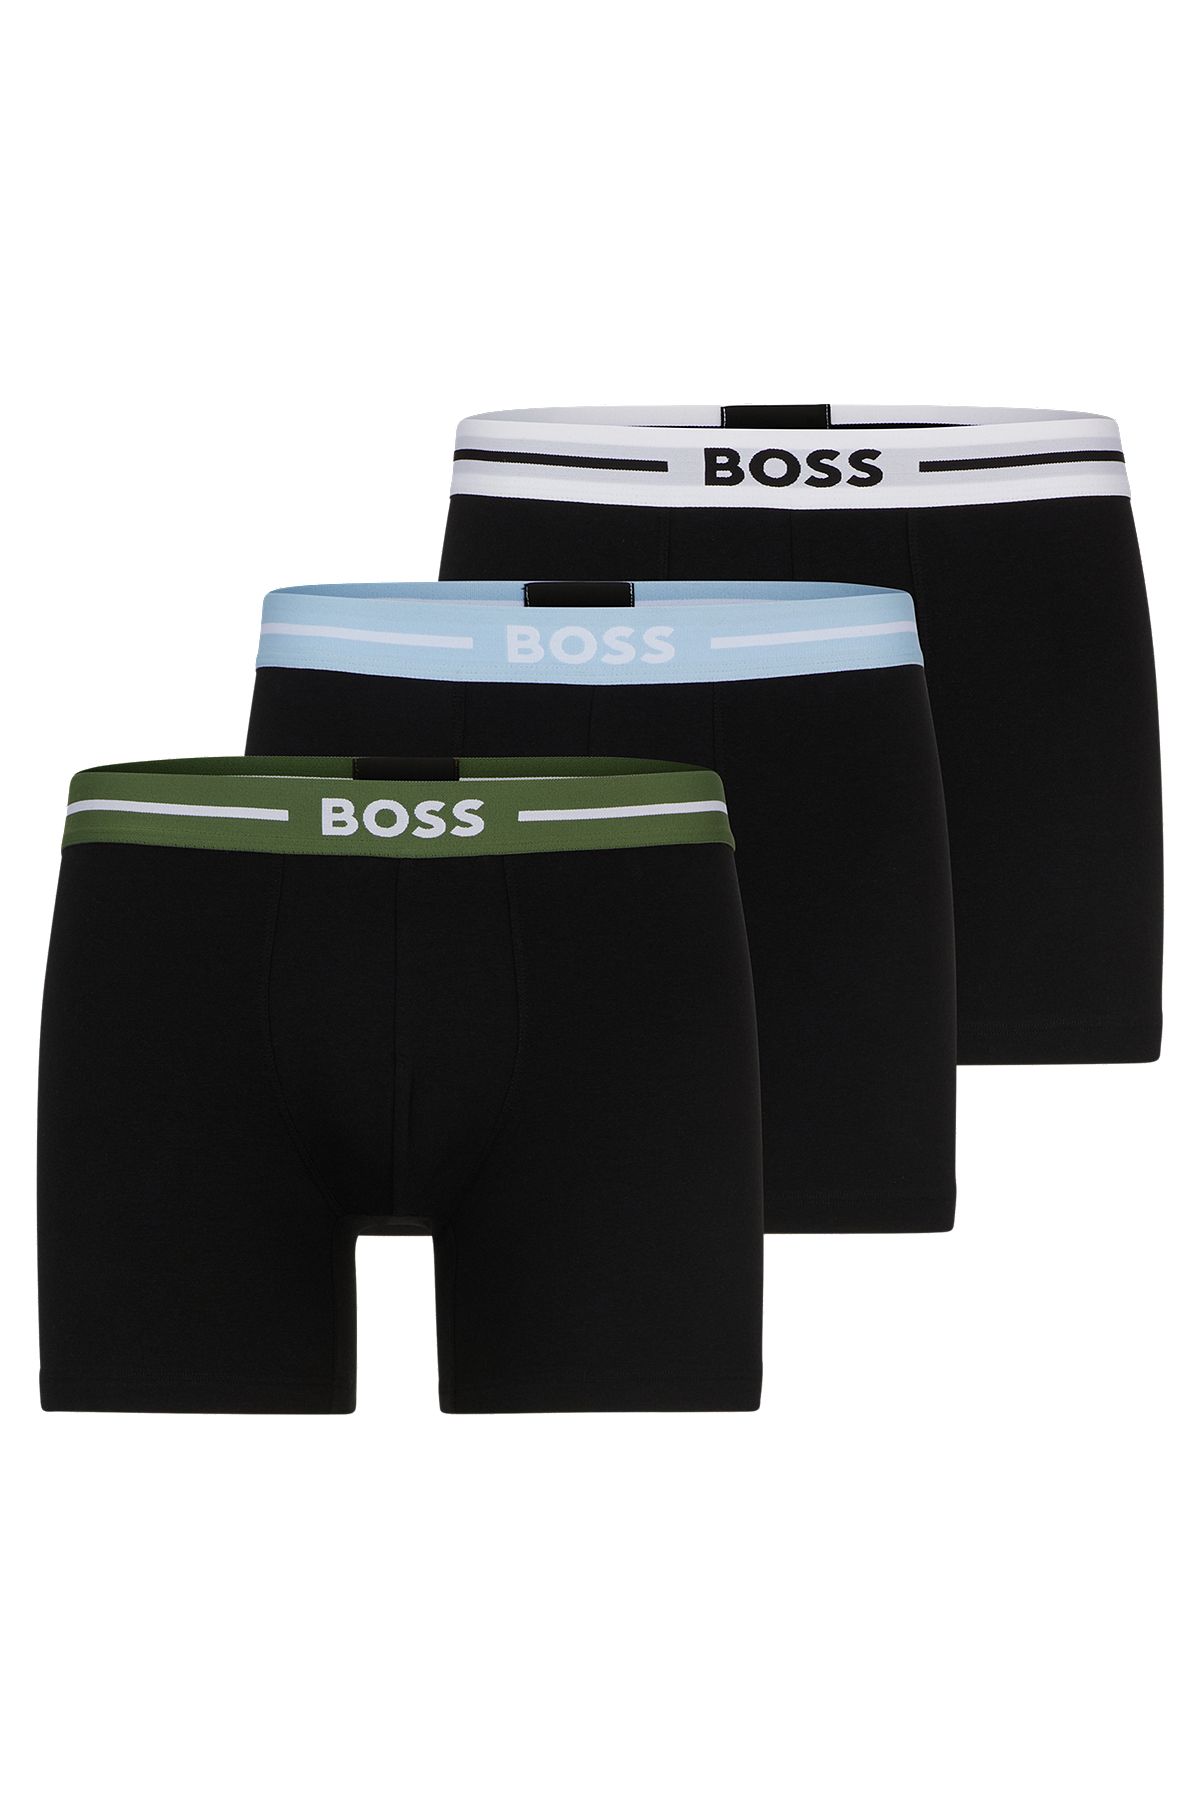 CEODOGG 365 Mens Boxer Trunks Cotton Aeropostale Shorts For Sexy Lingerie  And Retail Hot Sale X0825 From Fashion_official01, $9.36